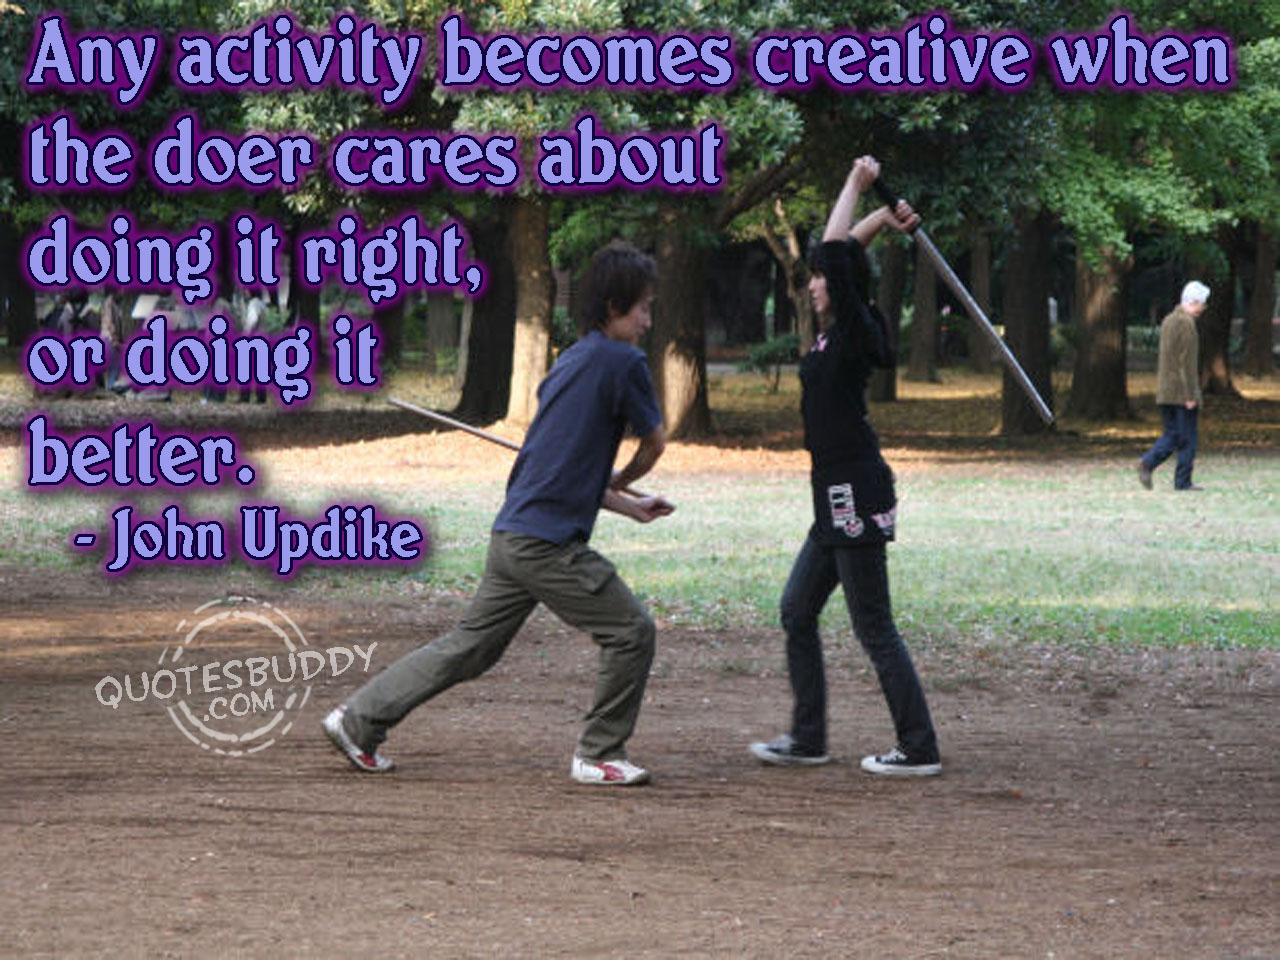 Any activity becomes creative when the doer cares about doing it right or better. John Updike